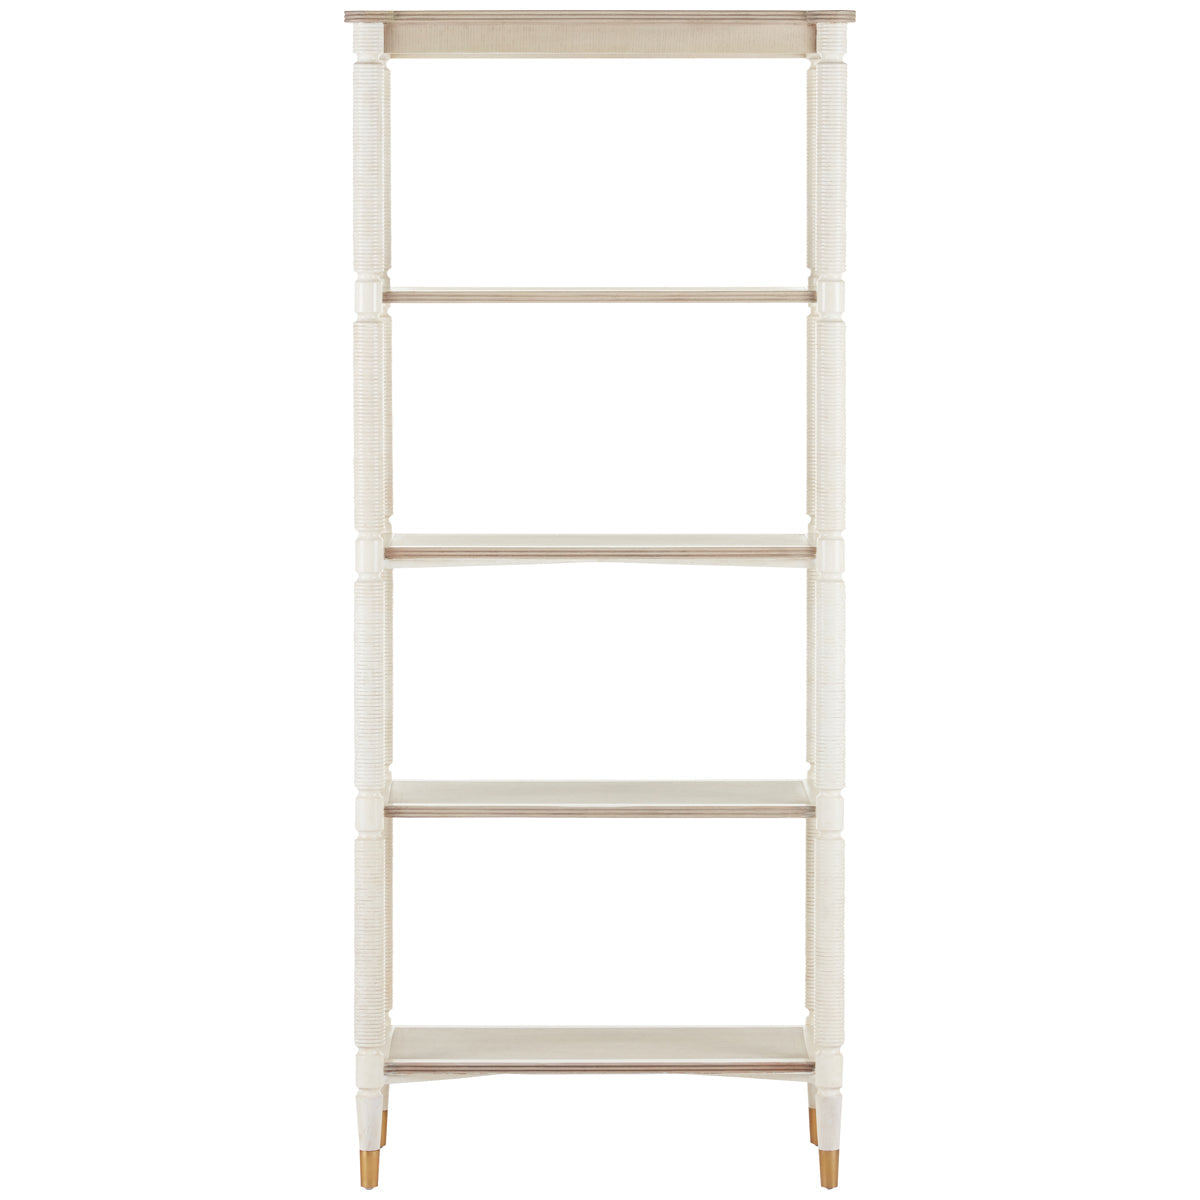 Currey and Company Aster Etagere